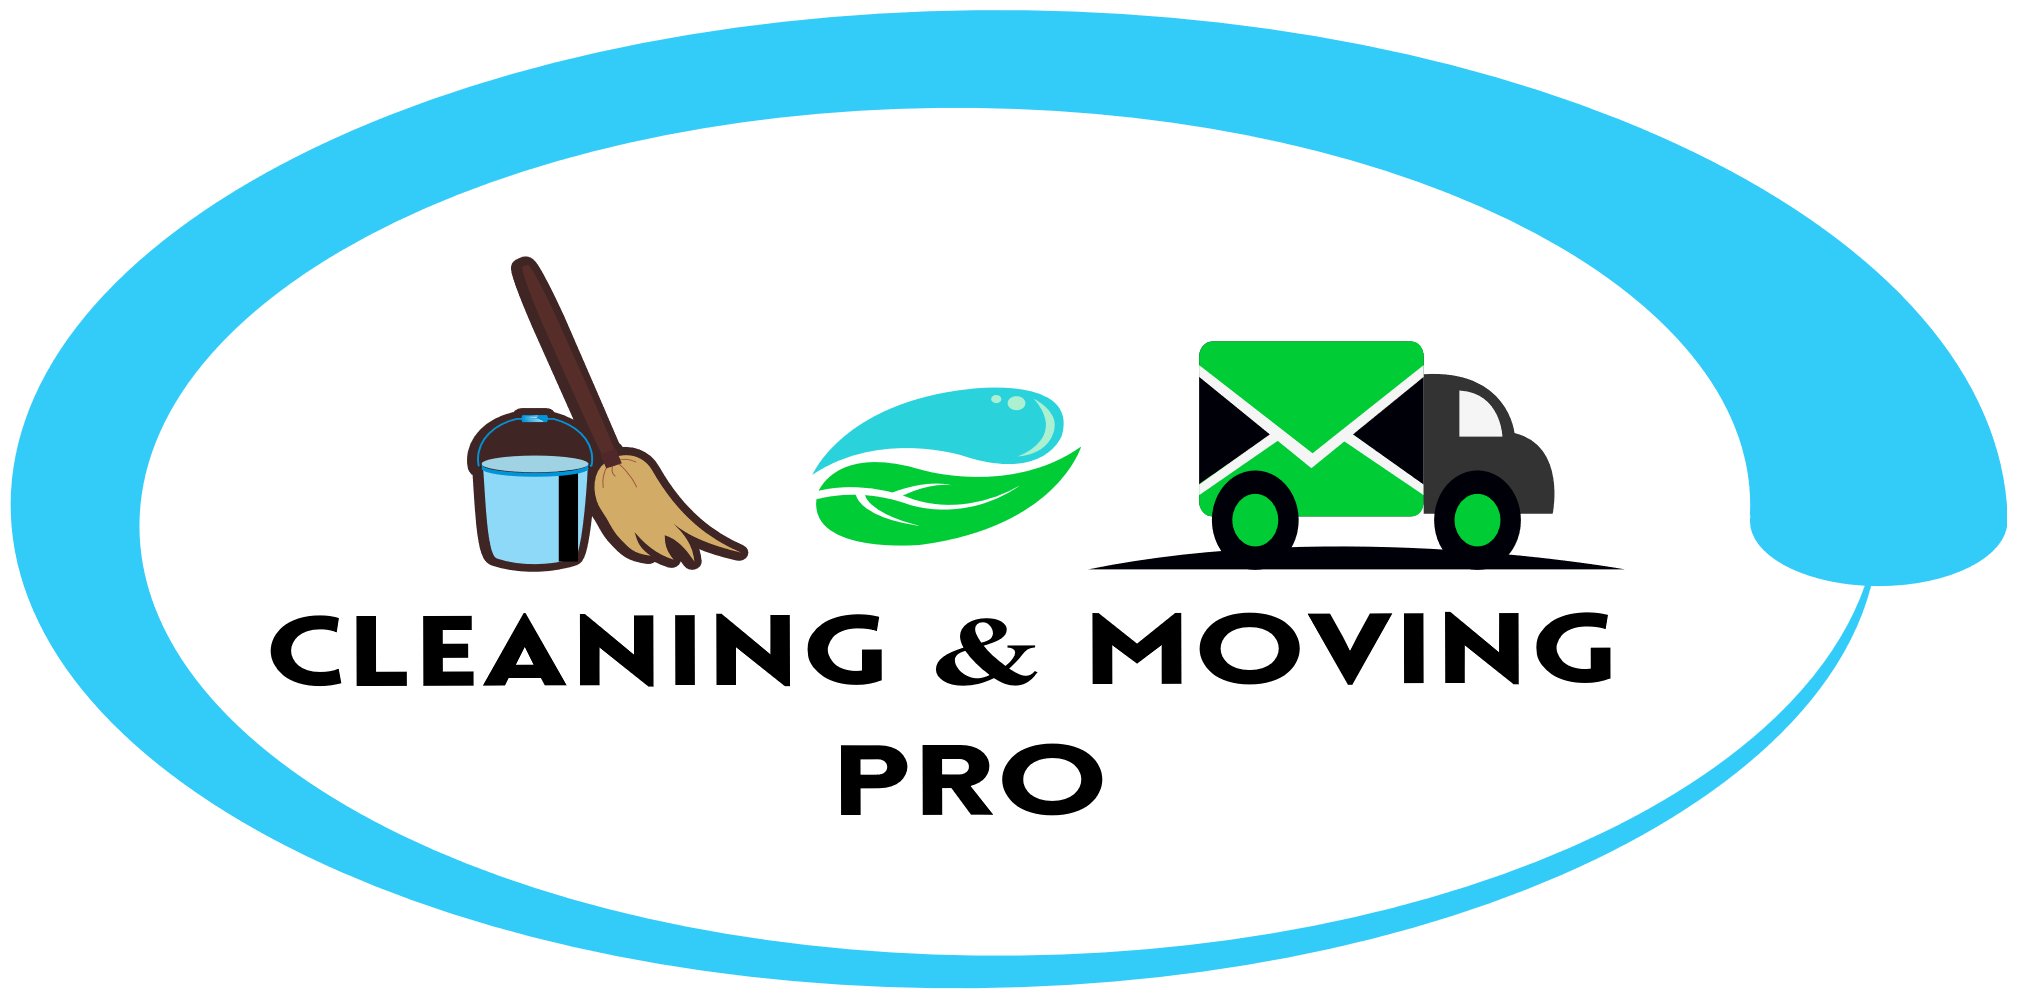 Daily Contract Cleaning Services-CLEANING AND MOVING PRO